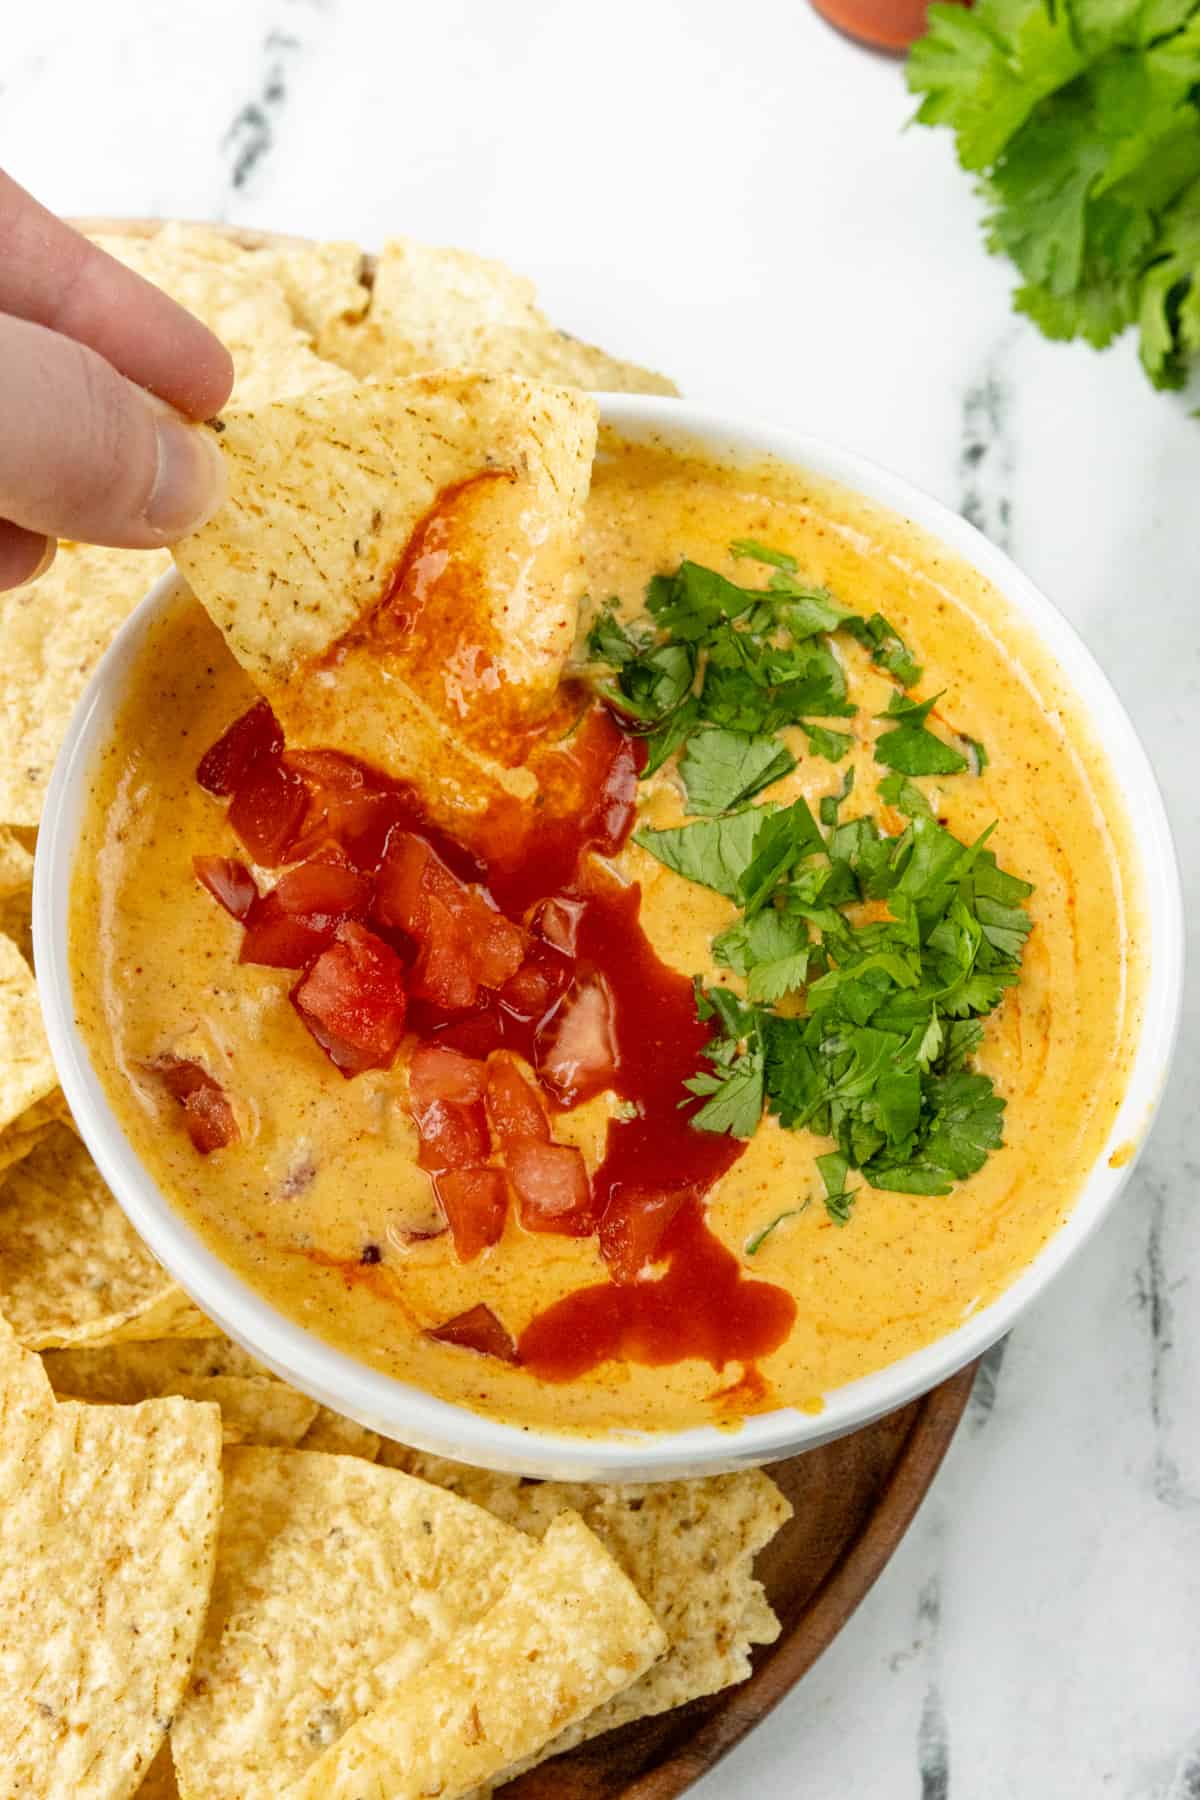 Dipping chip in queso